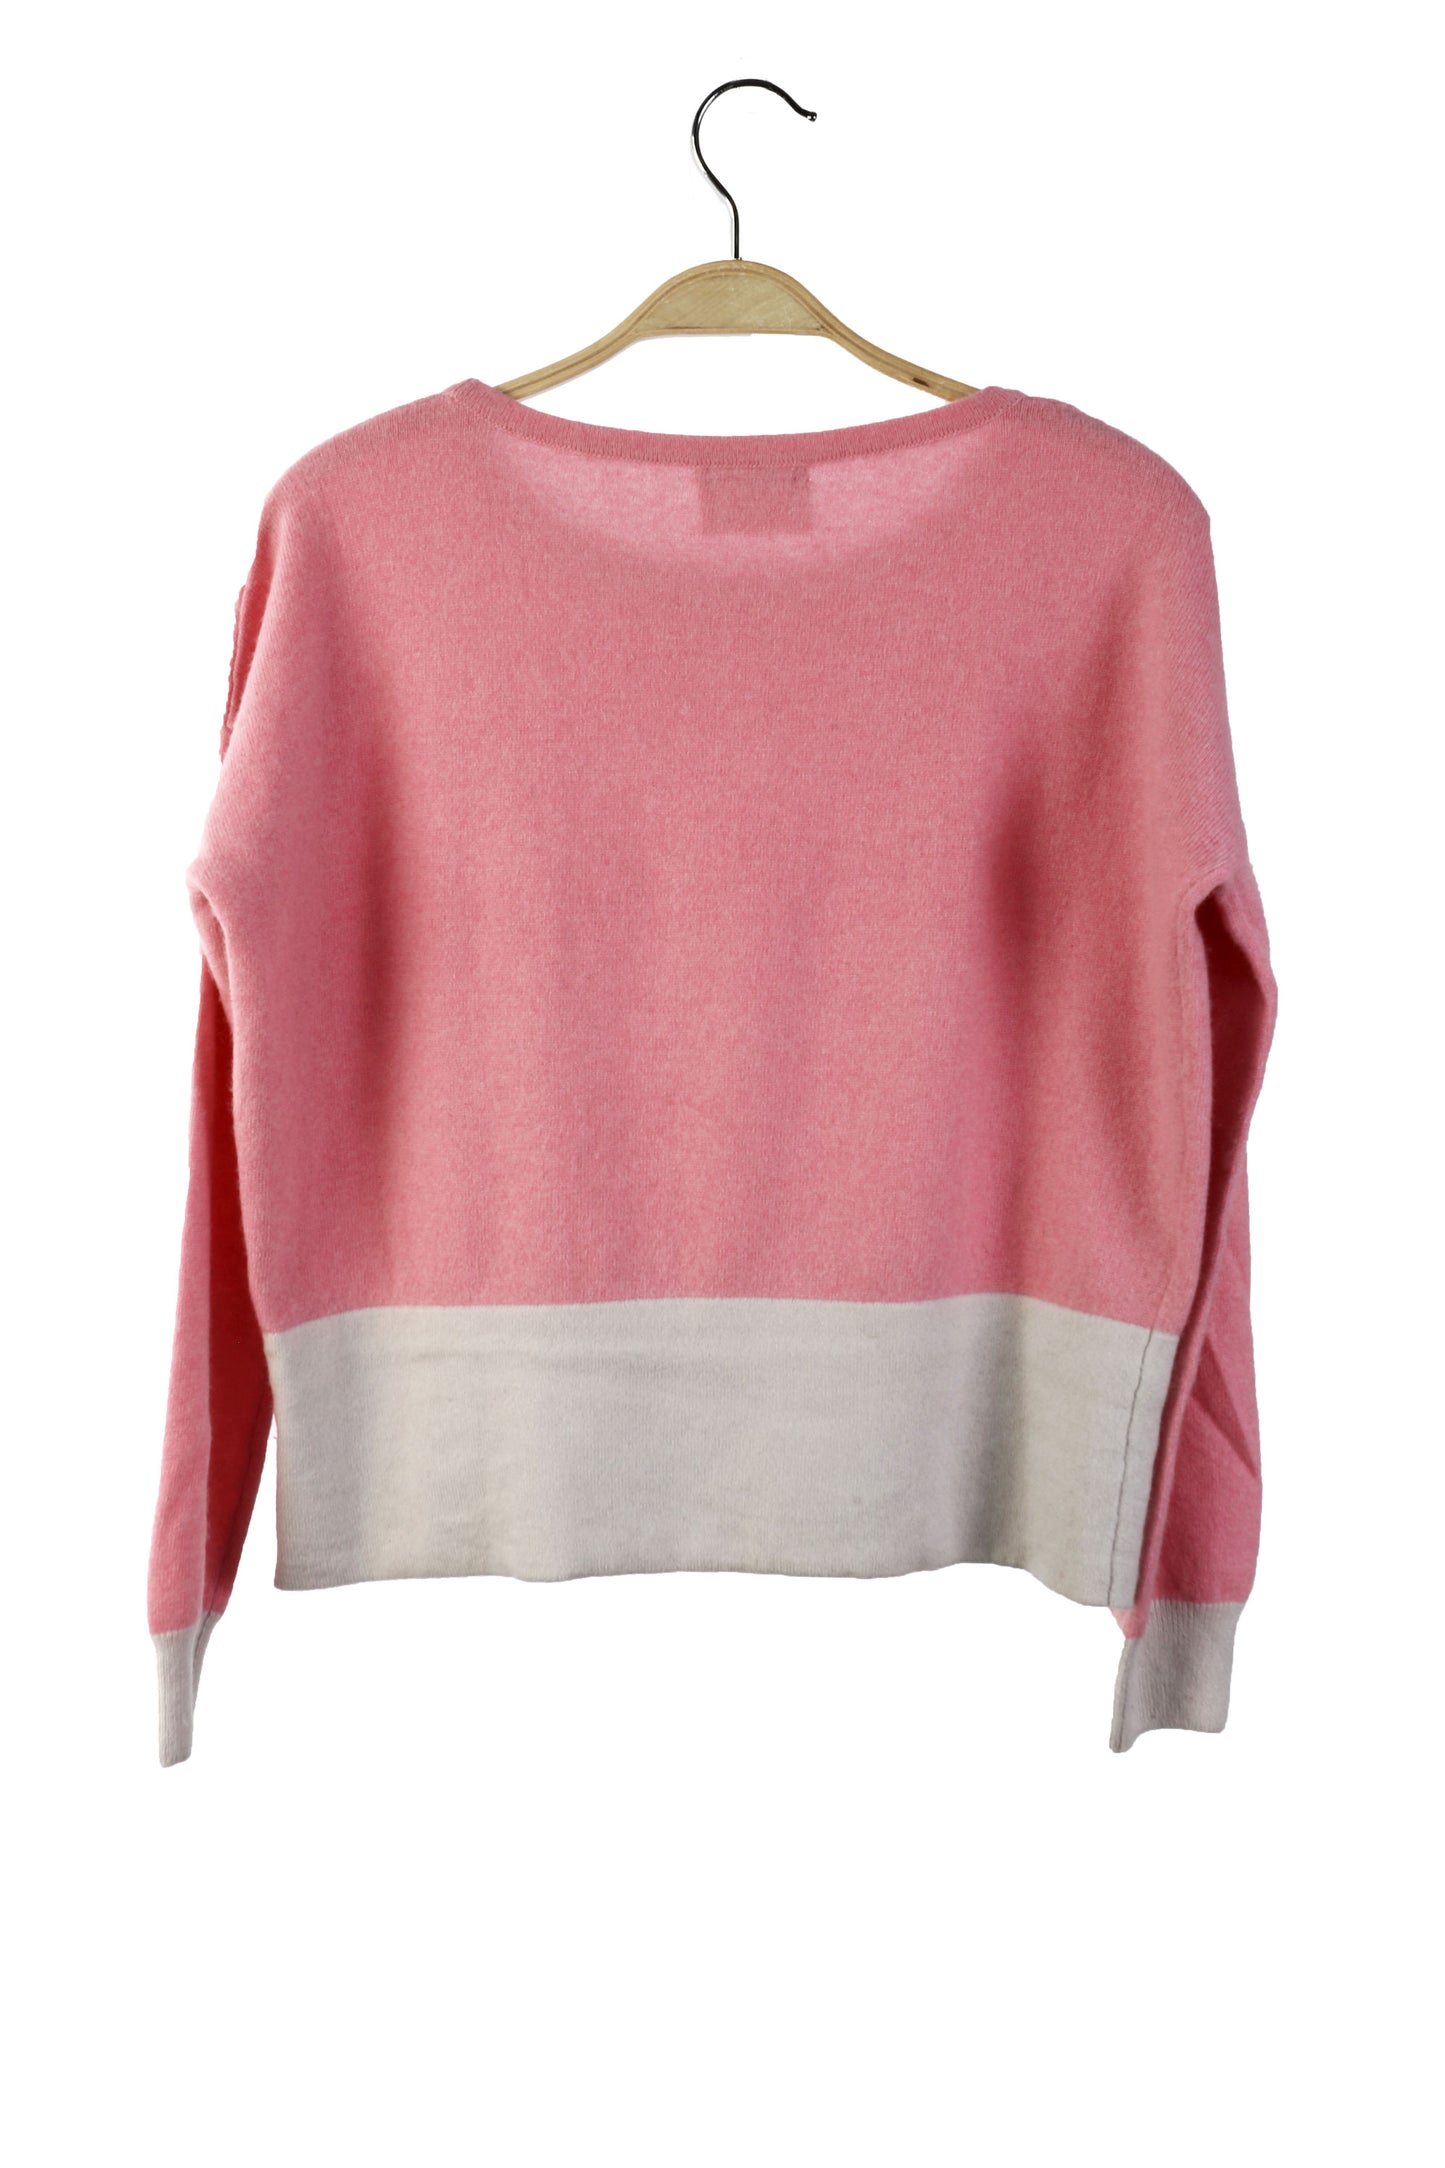 100% Cashmere Pink Boat Neck Sweater Small